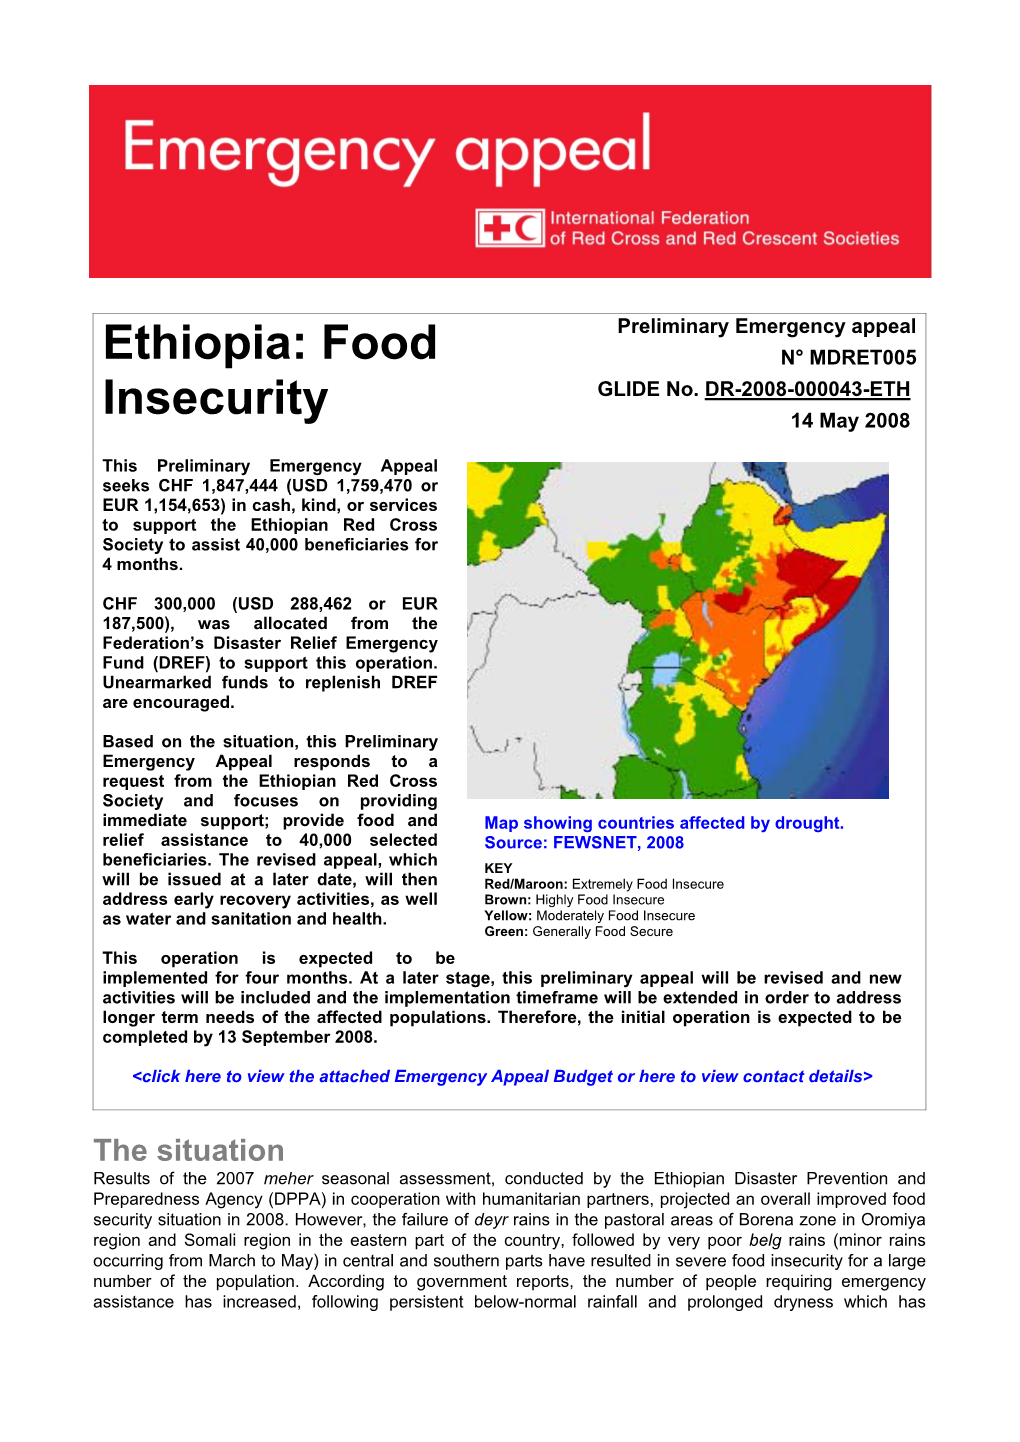 Ethiopia: Food Insecurity; Preliminary Emergency Appeal No. MDRET005